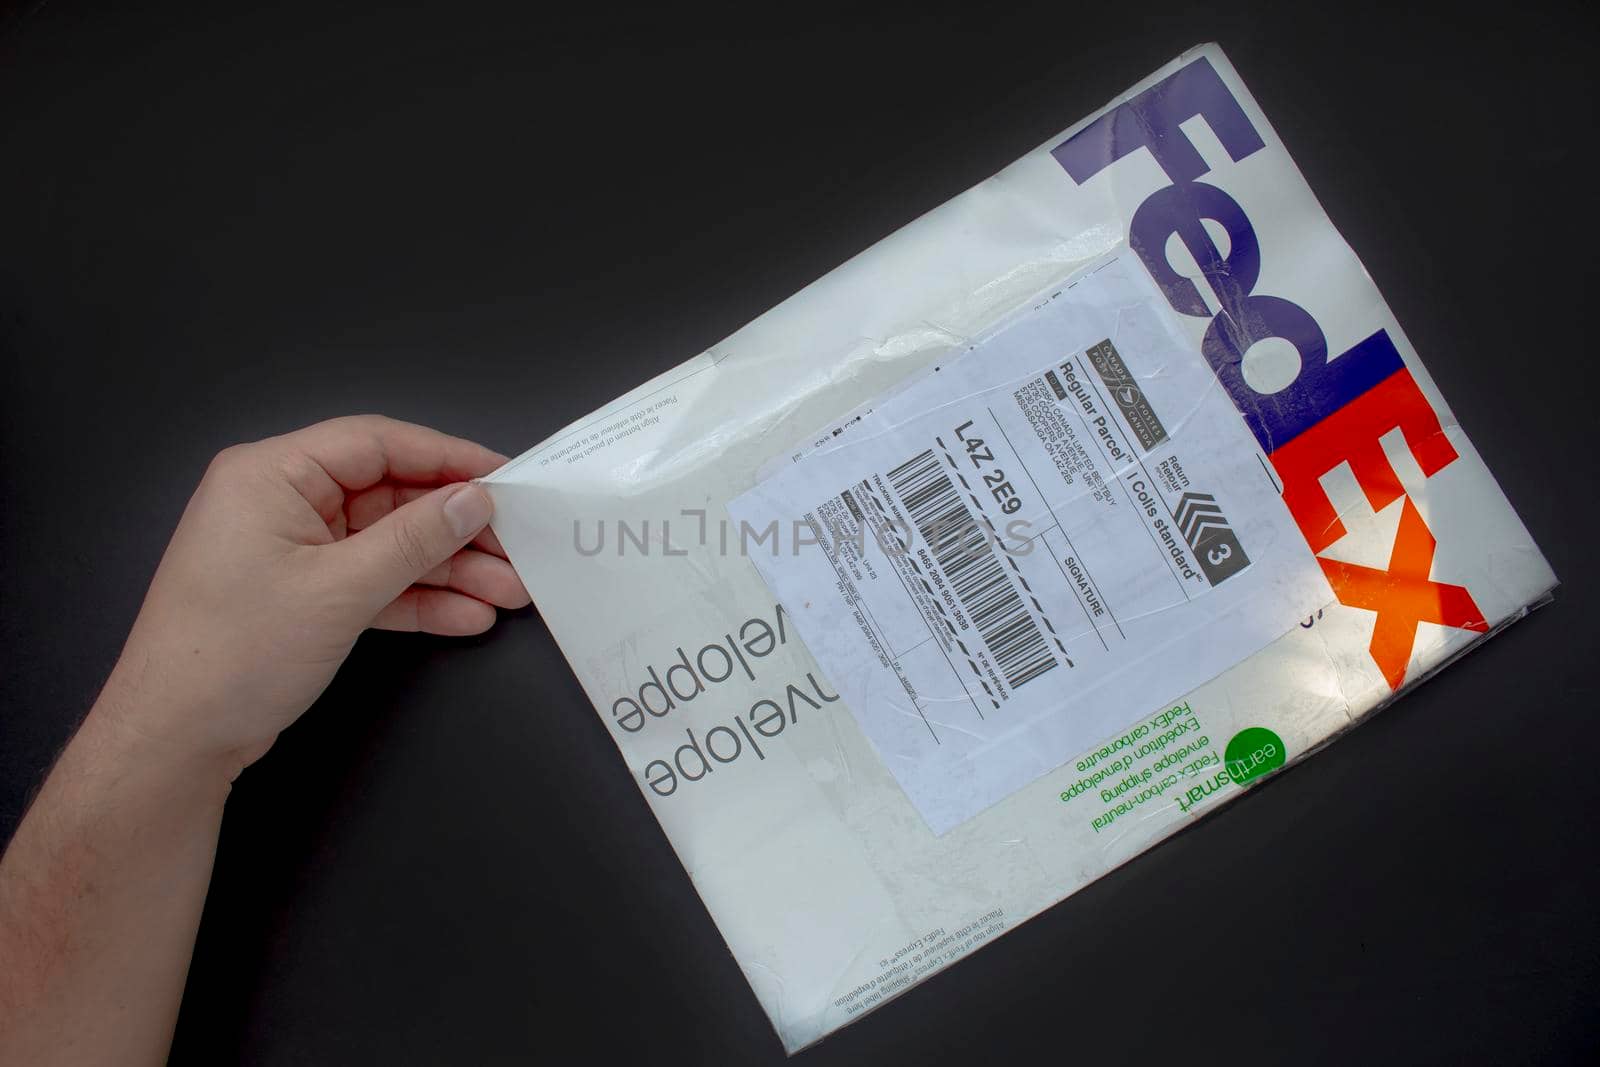 Calgary Alberta, Canada. Oct 17, 2020. A person with a Fedex package. Concept: shipping packages by oasisamuel